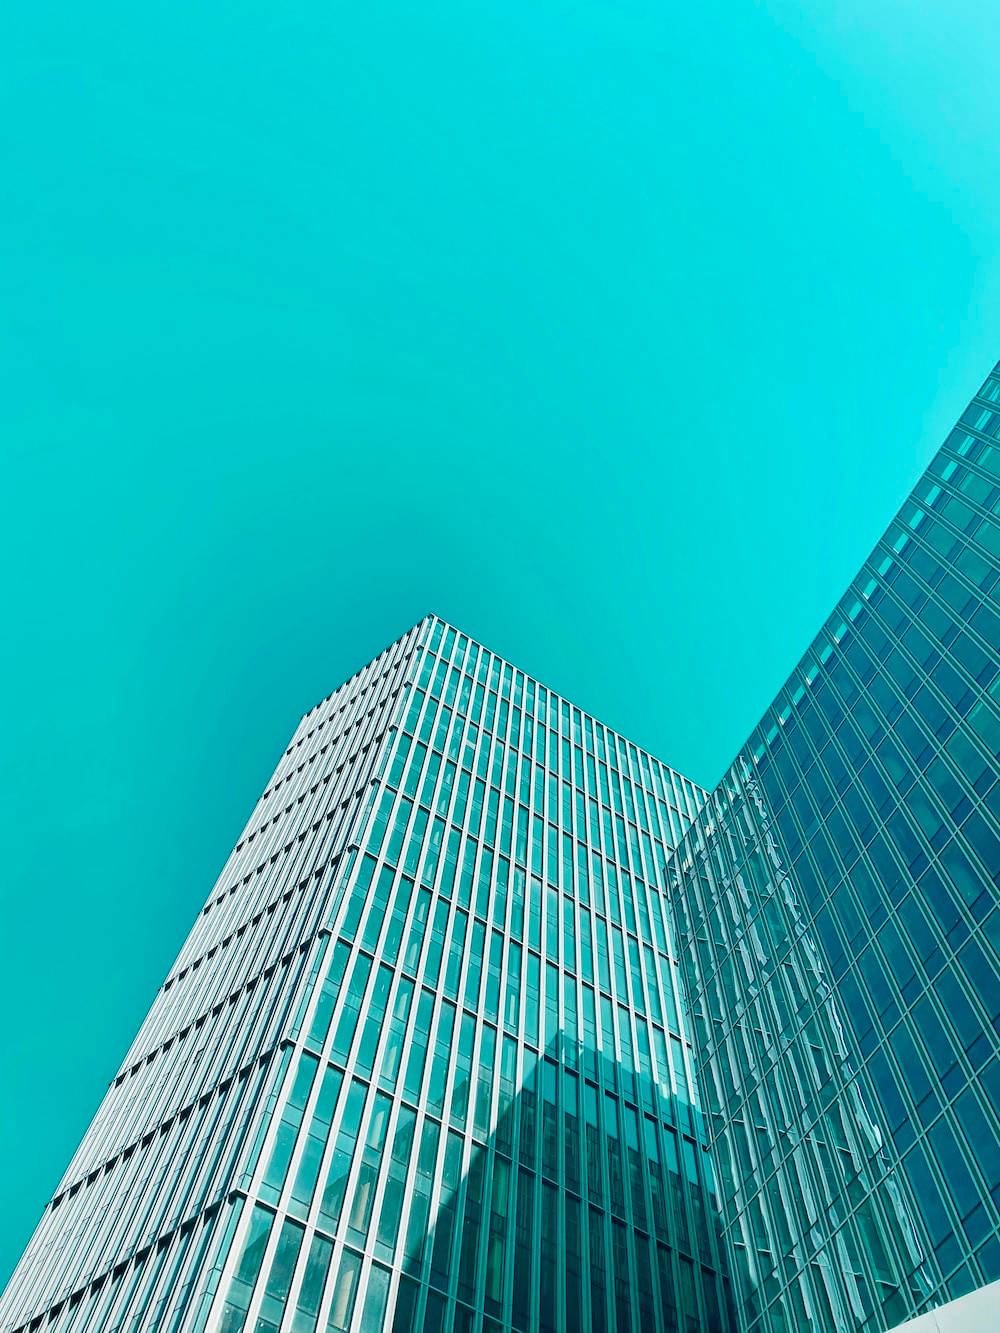 Cyan Sky And Building